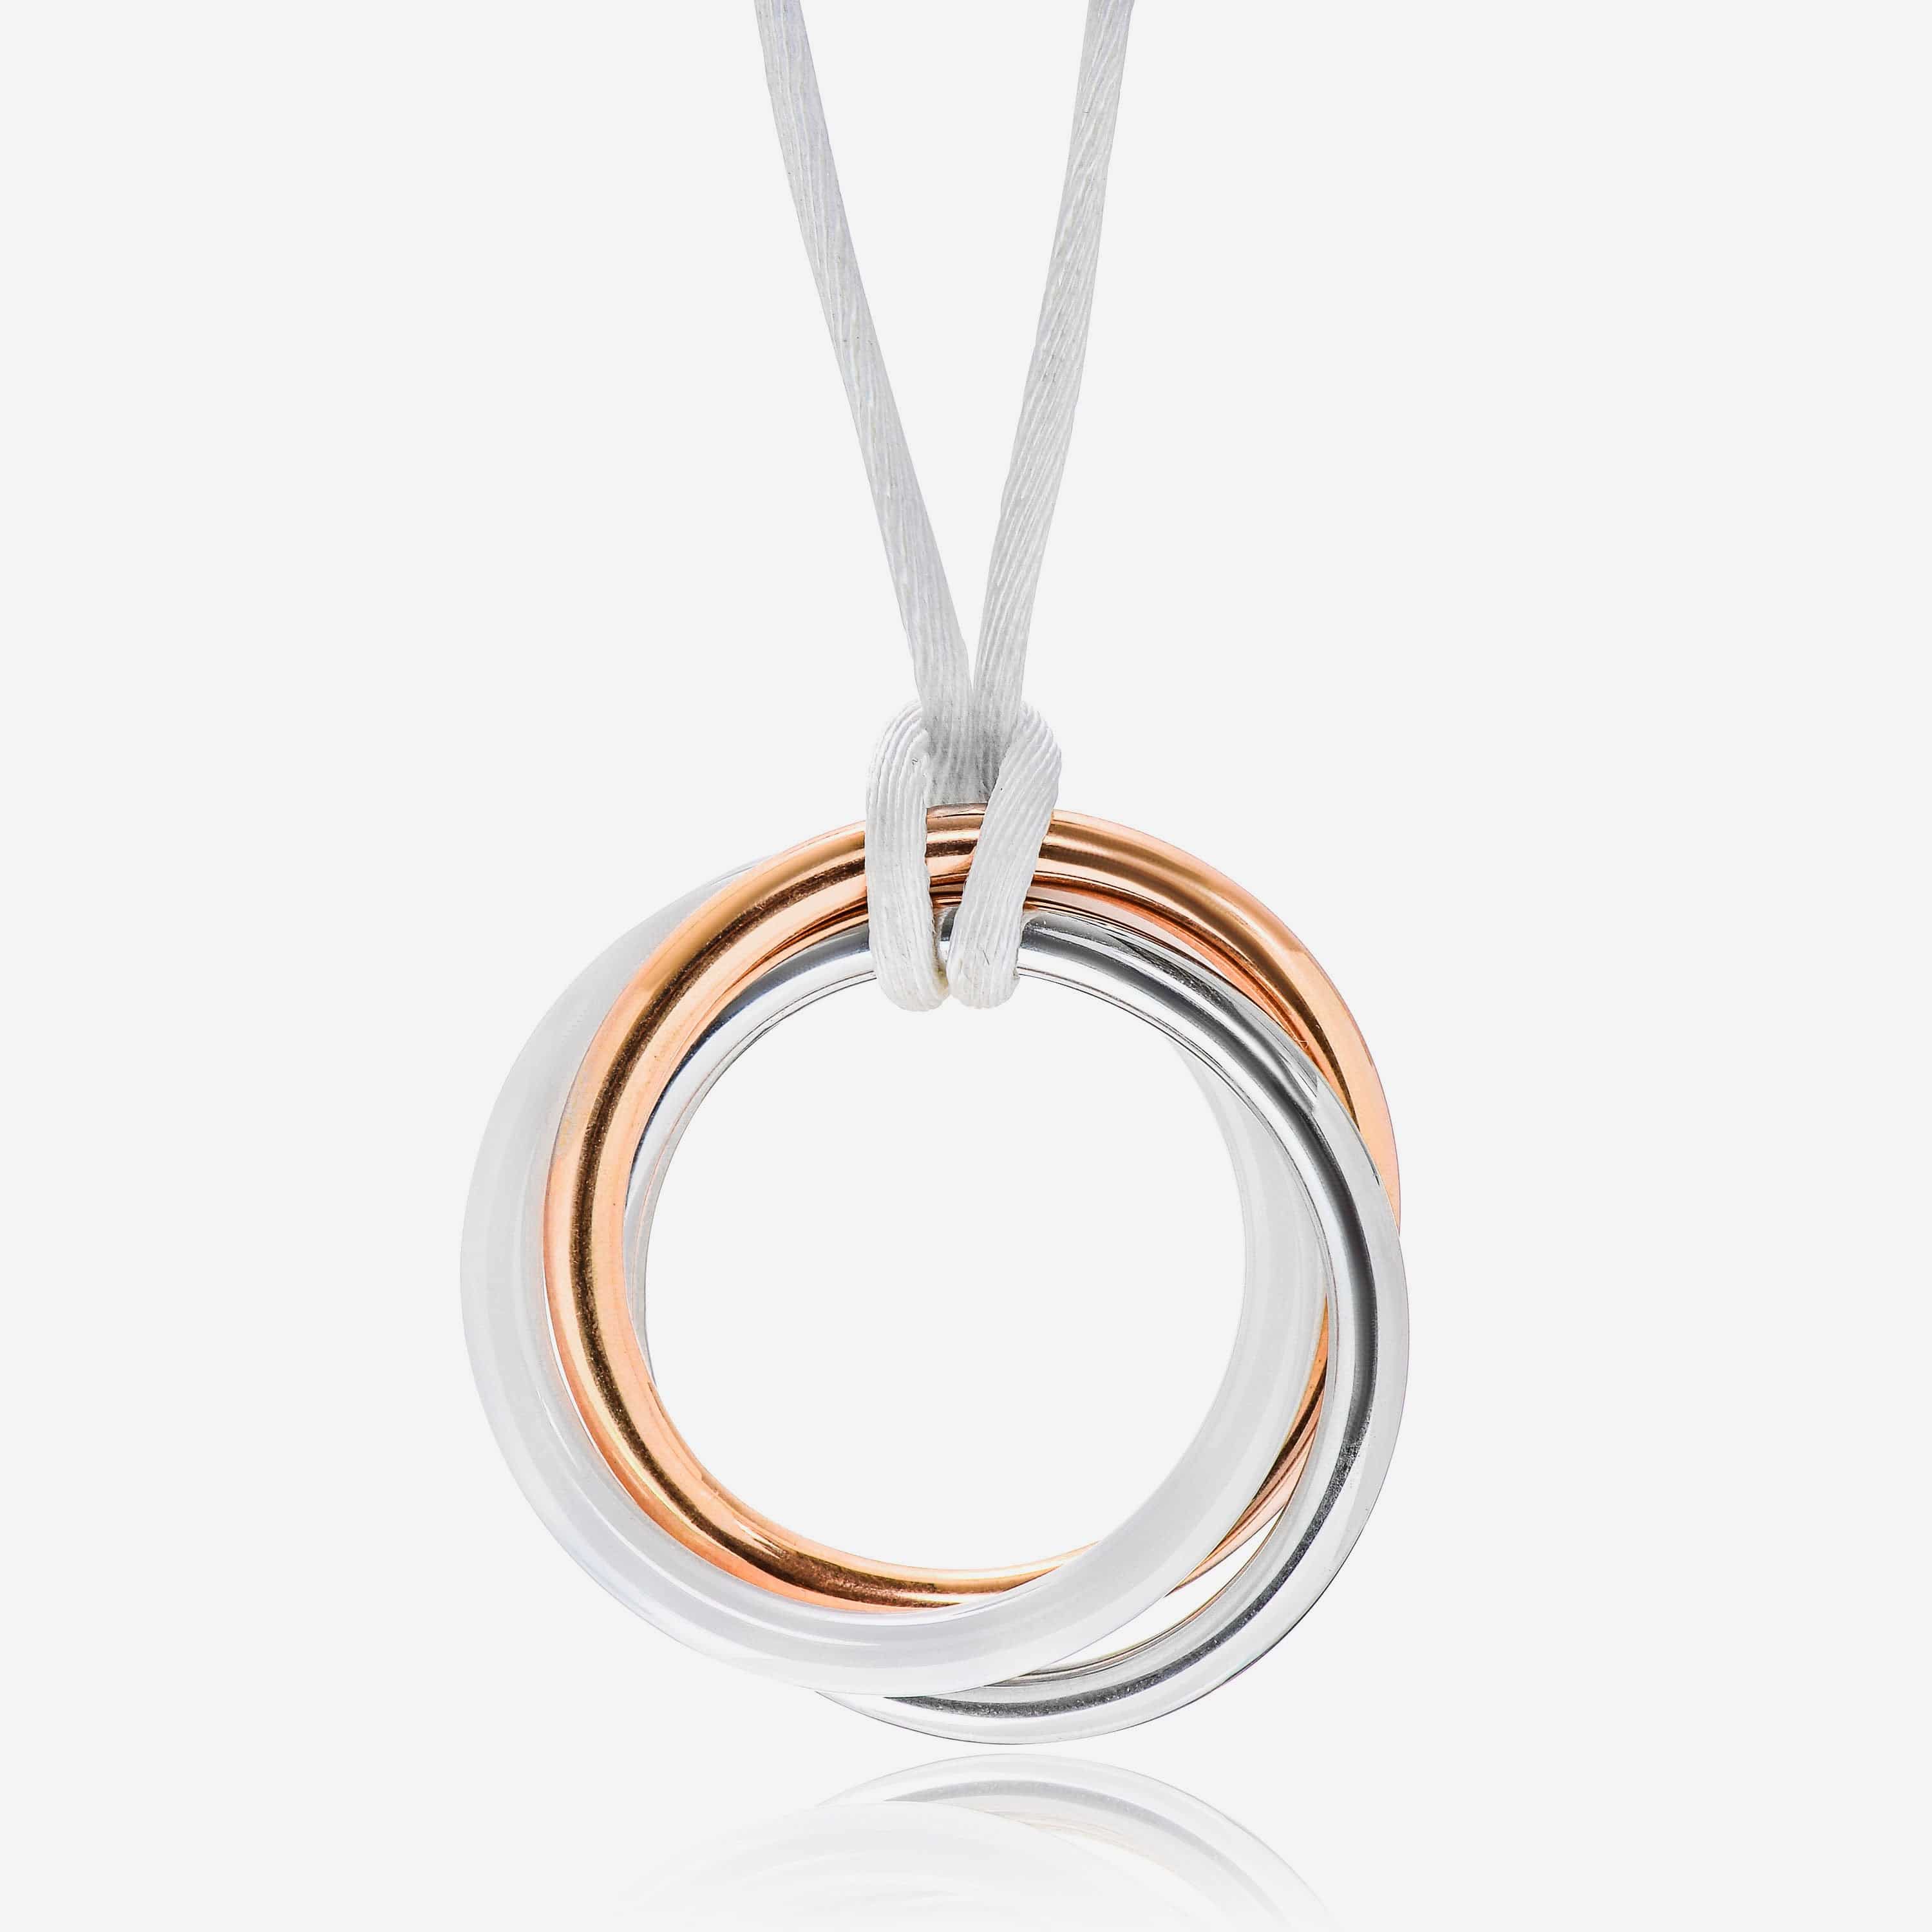 Image of SuperOro 18K Gold and Ceramic, Pendant Necklace